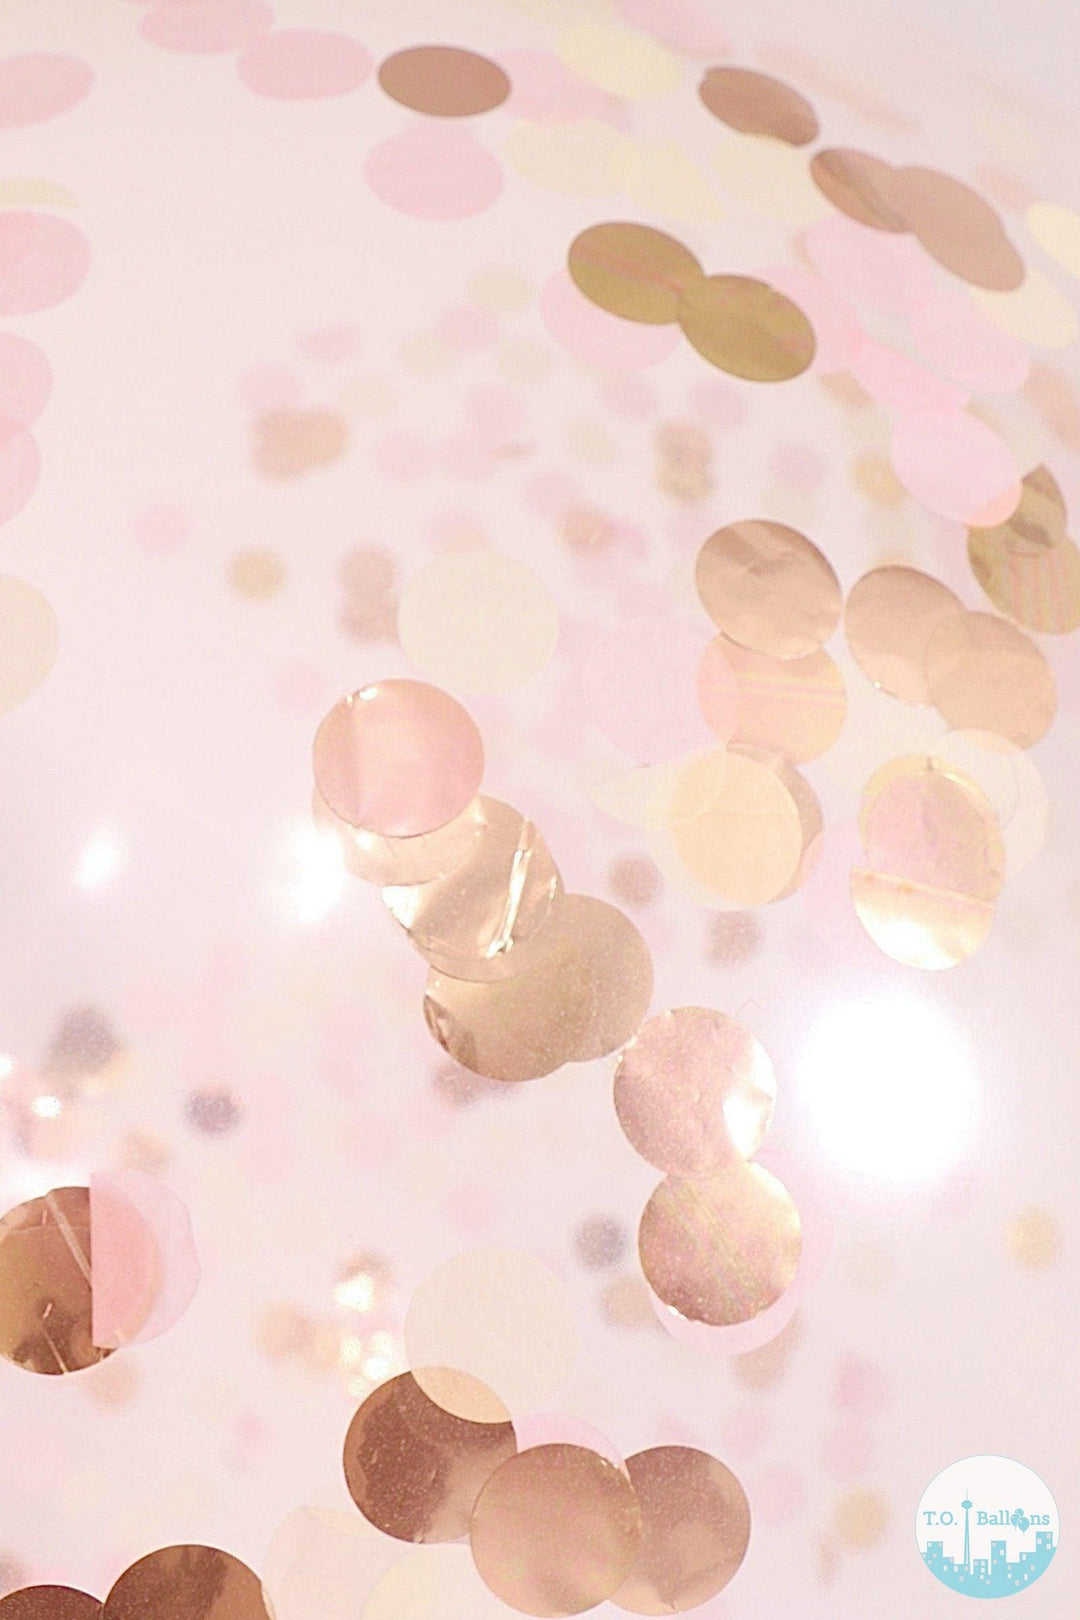 3FT PAPER CONFETTI - T.O. Balloons